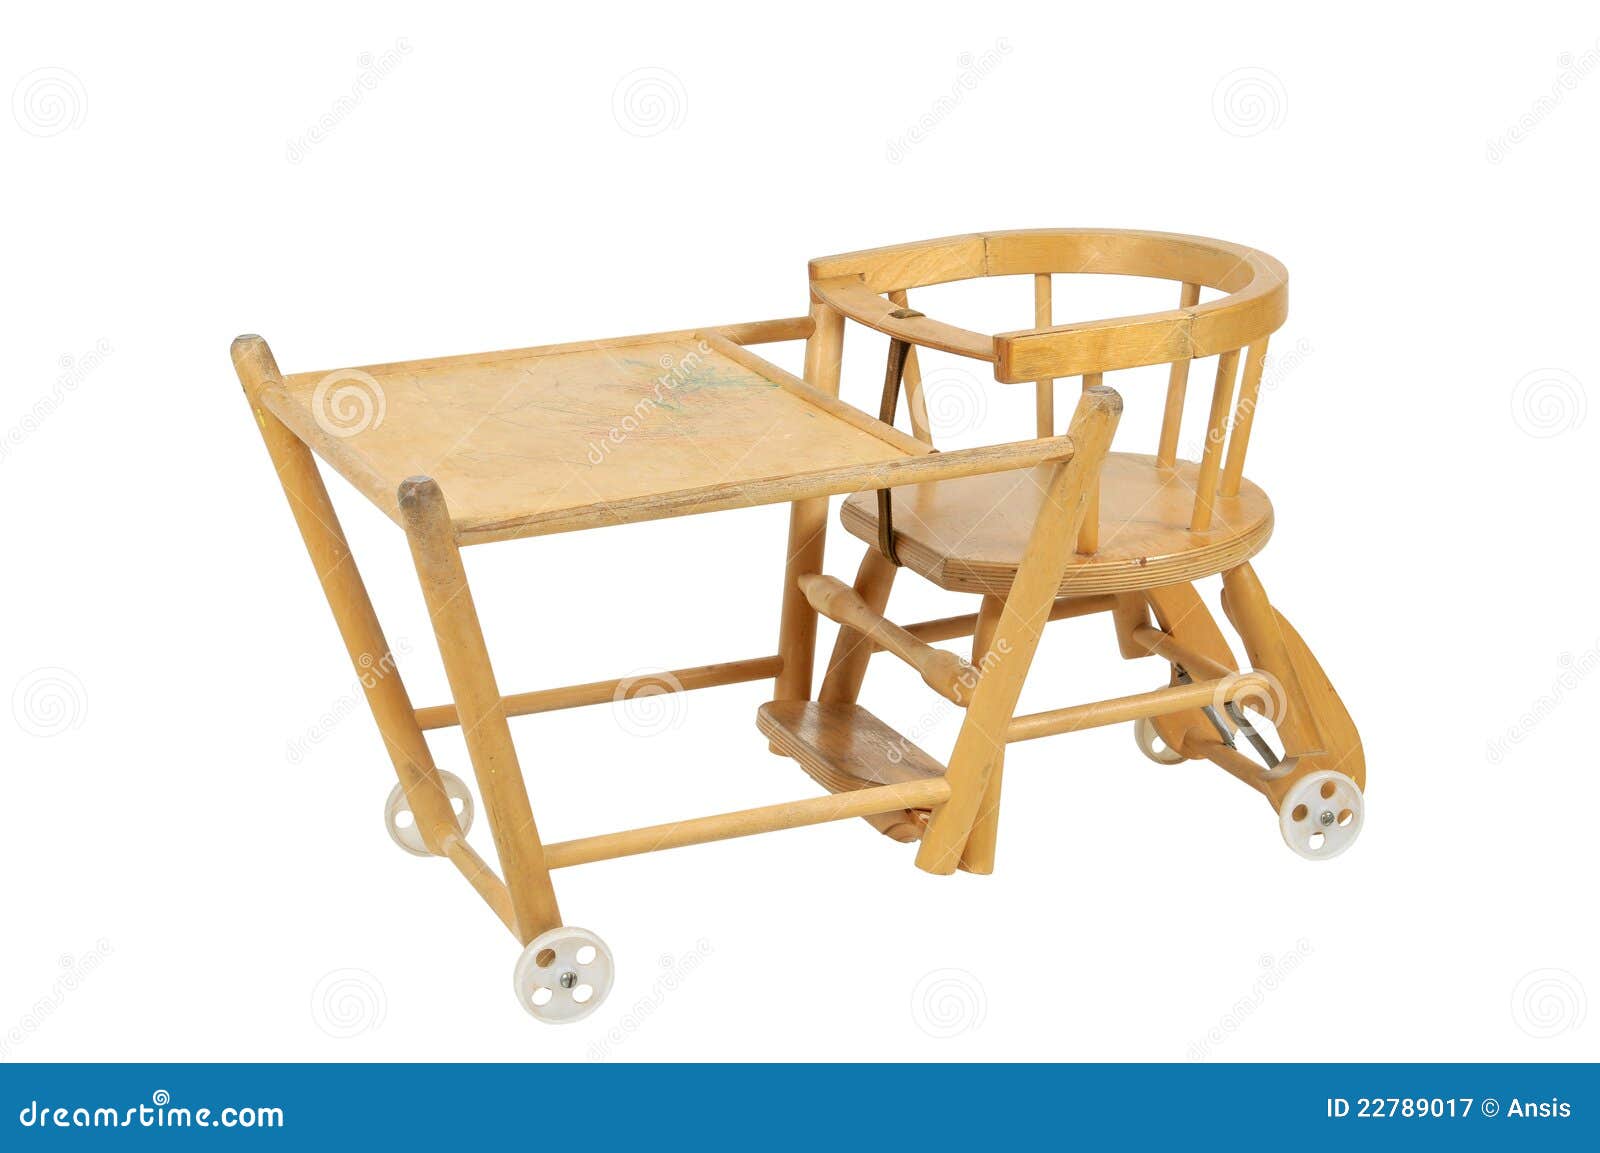 Baby Feeding Chair Royalty Free Stock Photography - Image: 22789017